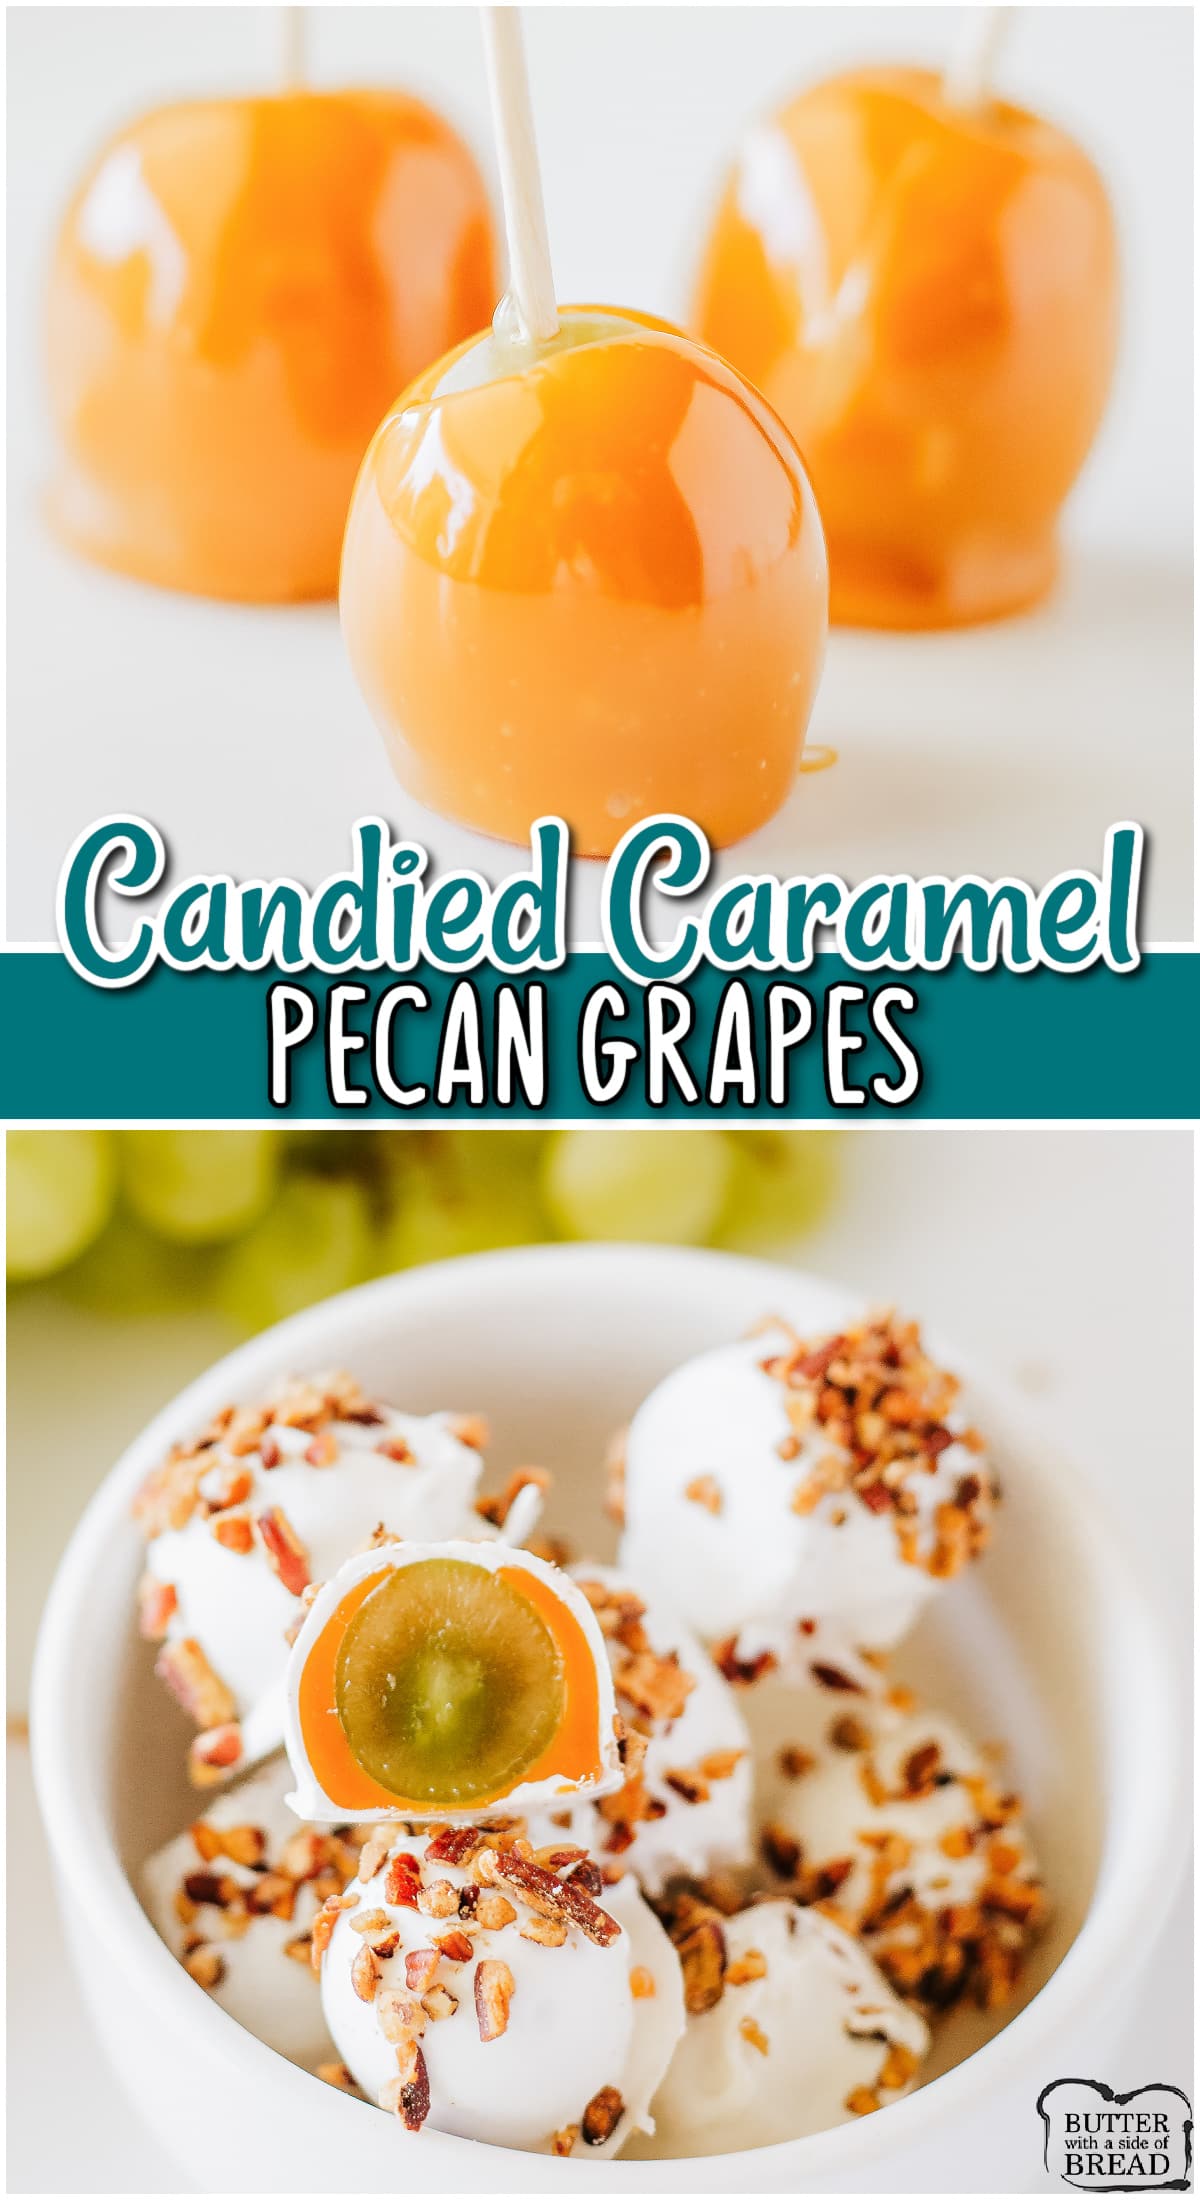 Caramel Grapes are fresh grapes dipped in melted caramel & white chocolate, then covered with pecans! Simple, decadent & utterly delicious!